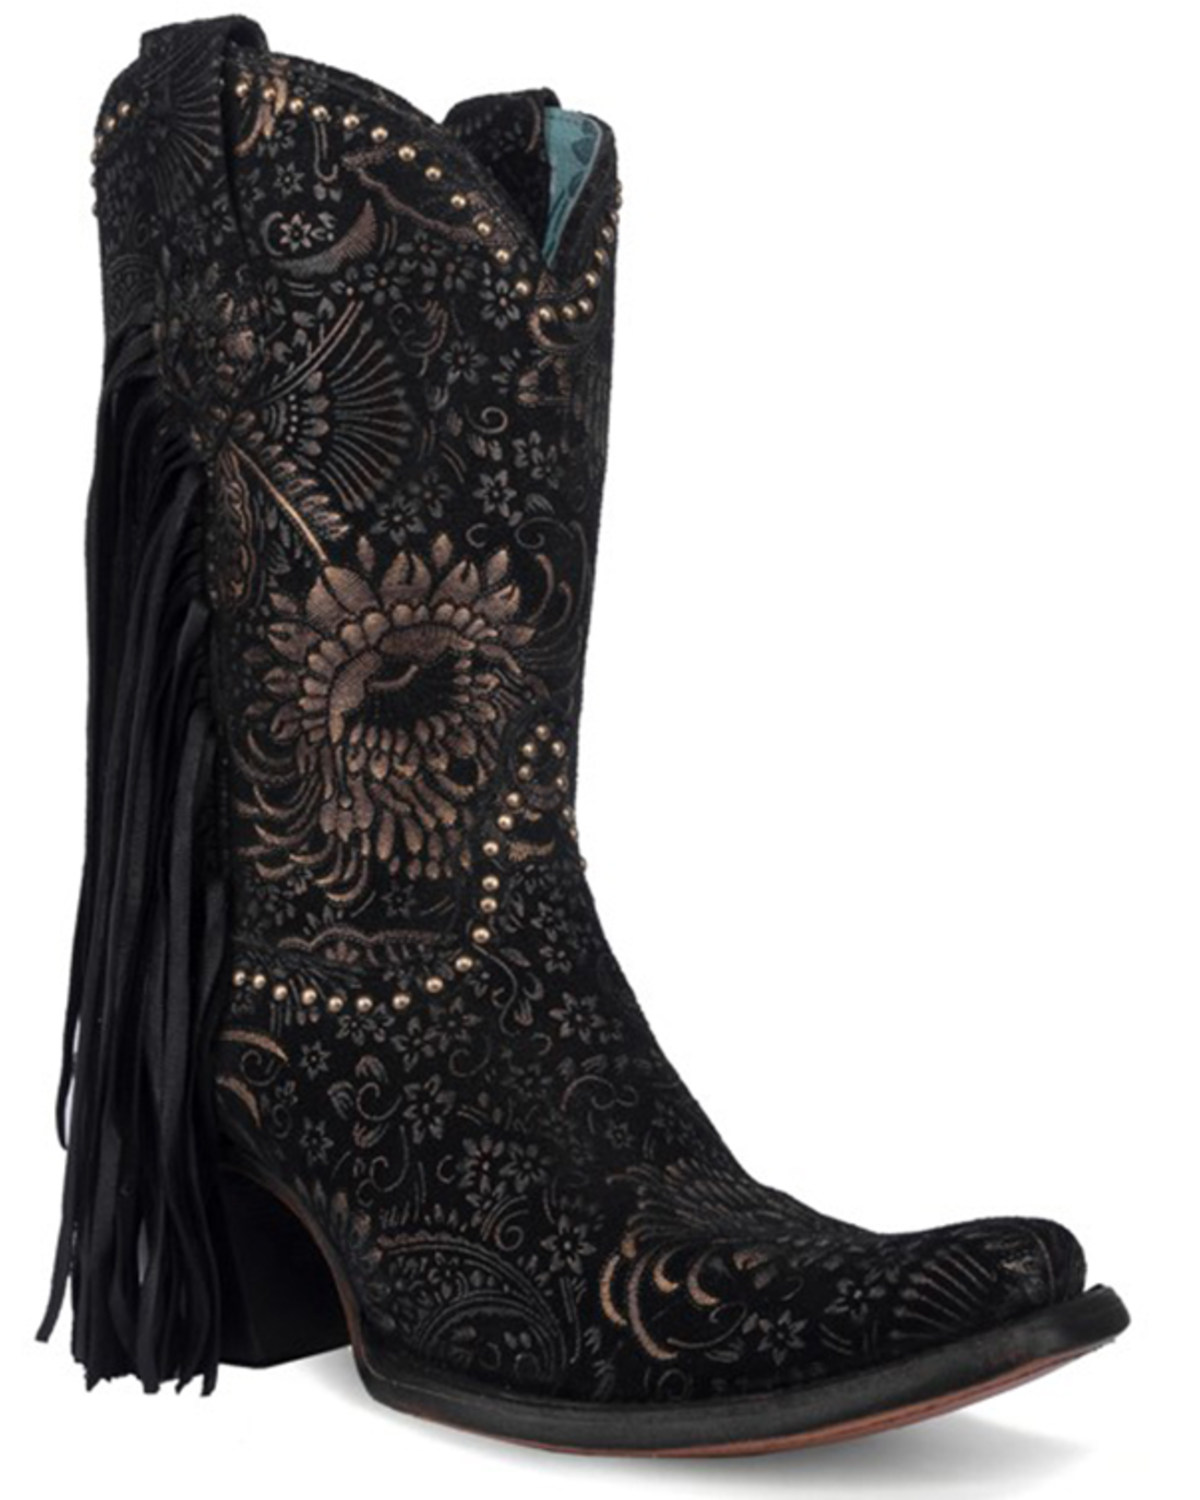 Corral Women's Stamped Floral Suede Fringe Western Boots - Square Toe